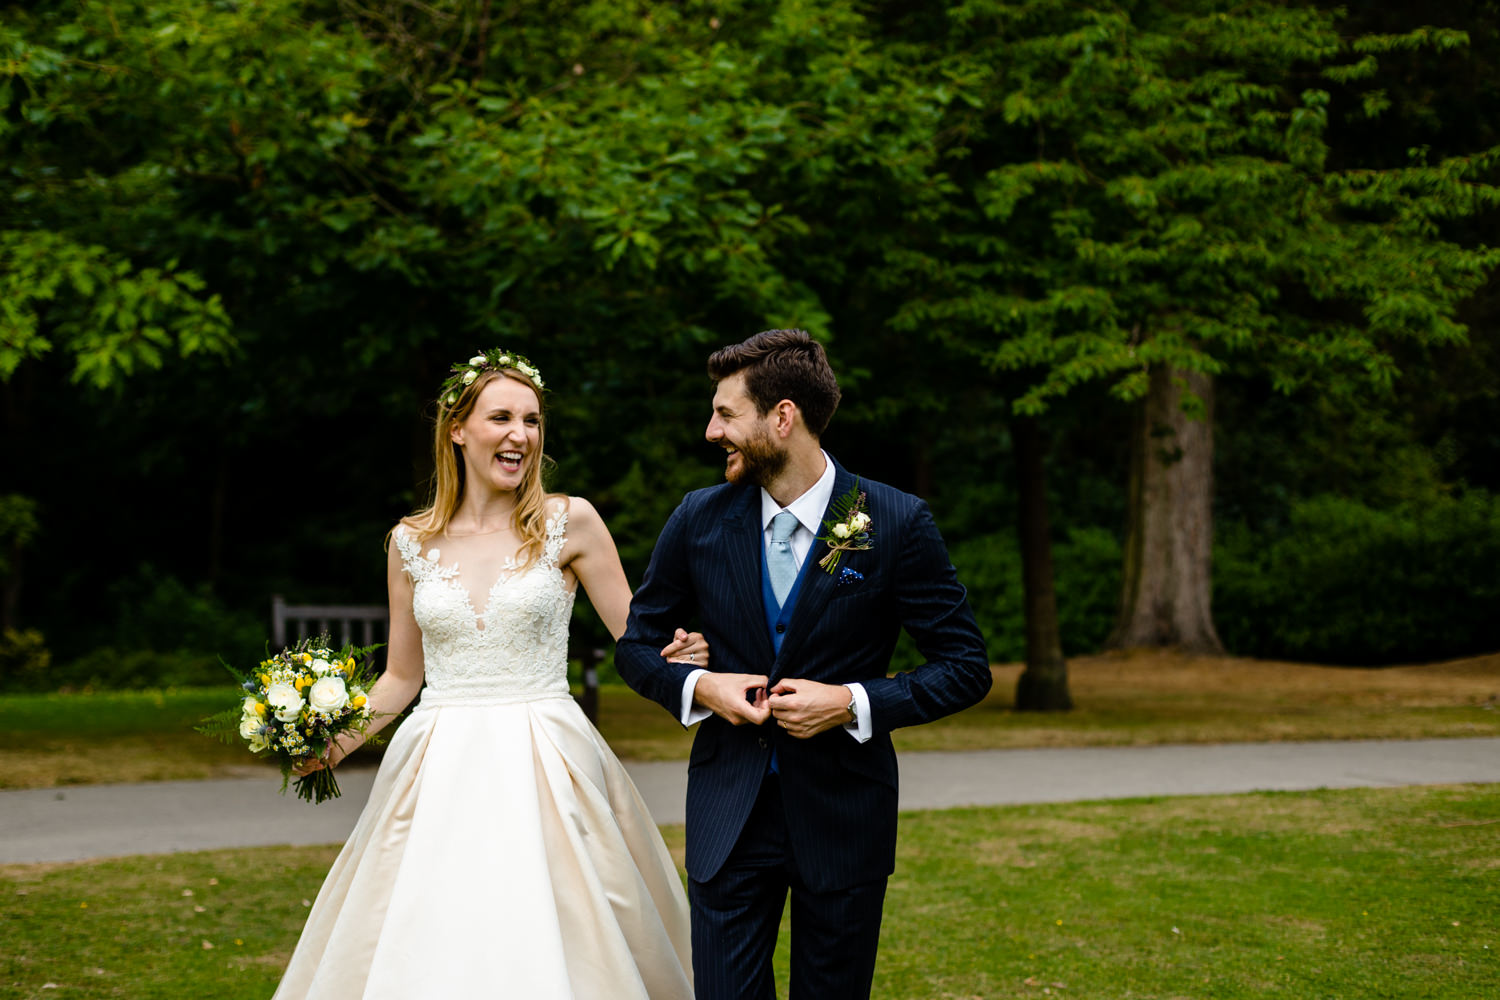 A bride and groom laughing as they walk, Whirlowbrook Hall	Sheffield wedding photography